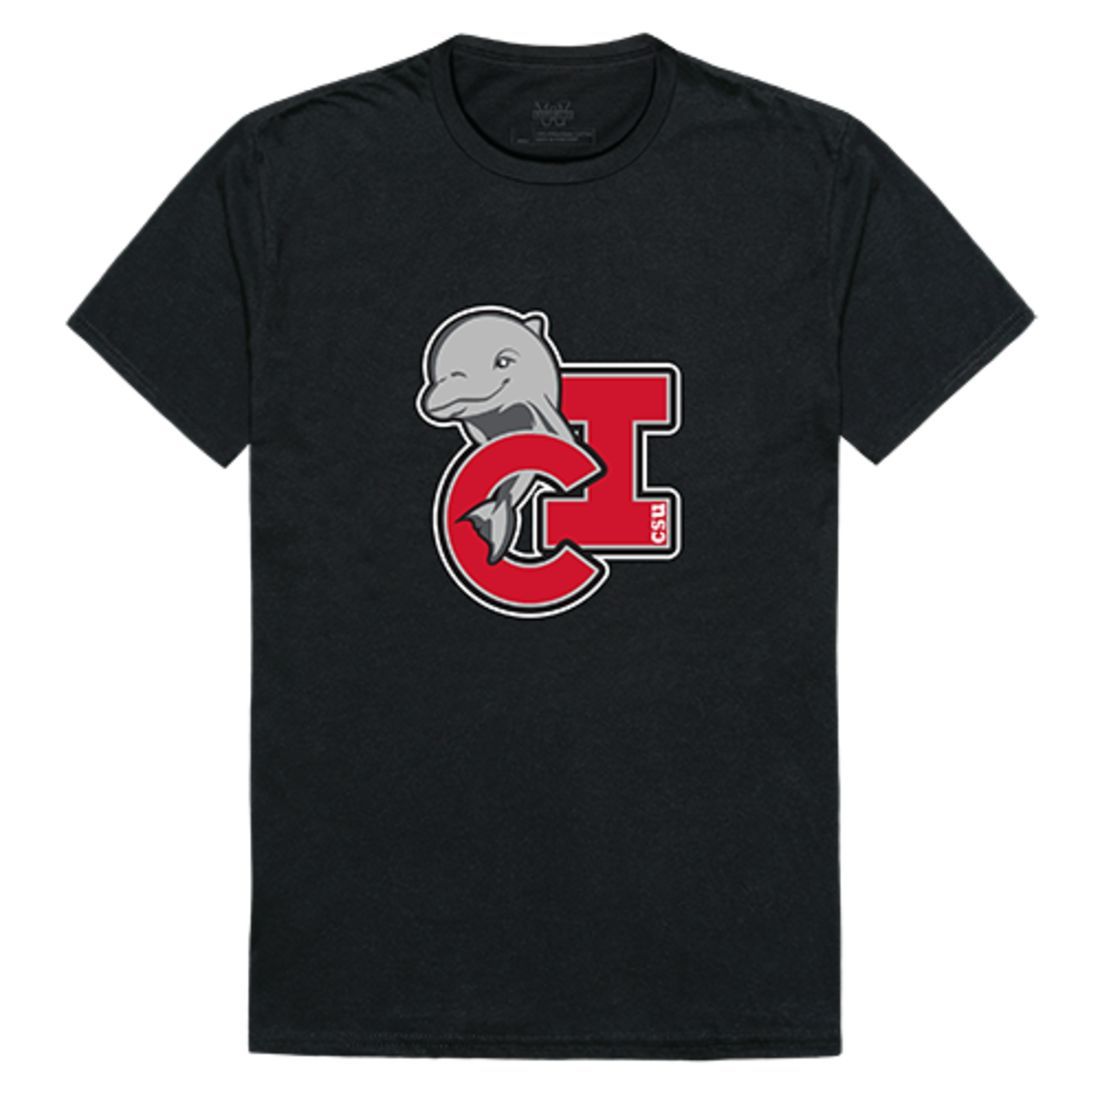 CSUCI CalIfornia State University Channel Islands The Dolphins NCAA The Freshman Tee T-Shirt Black-Campus-Wardrobe